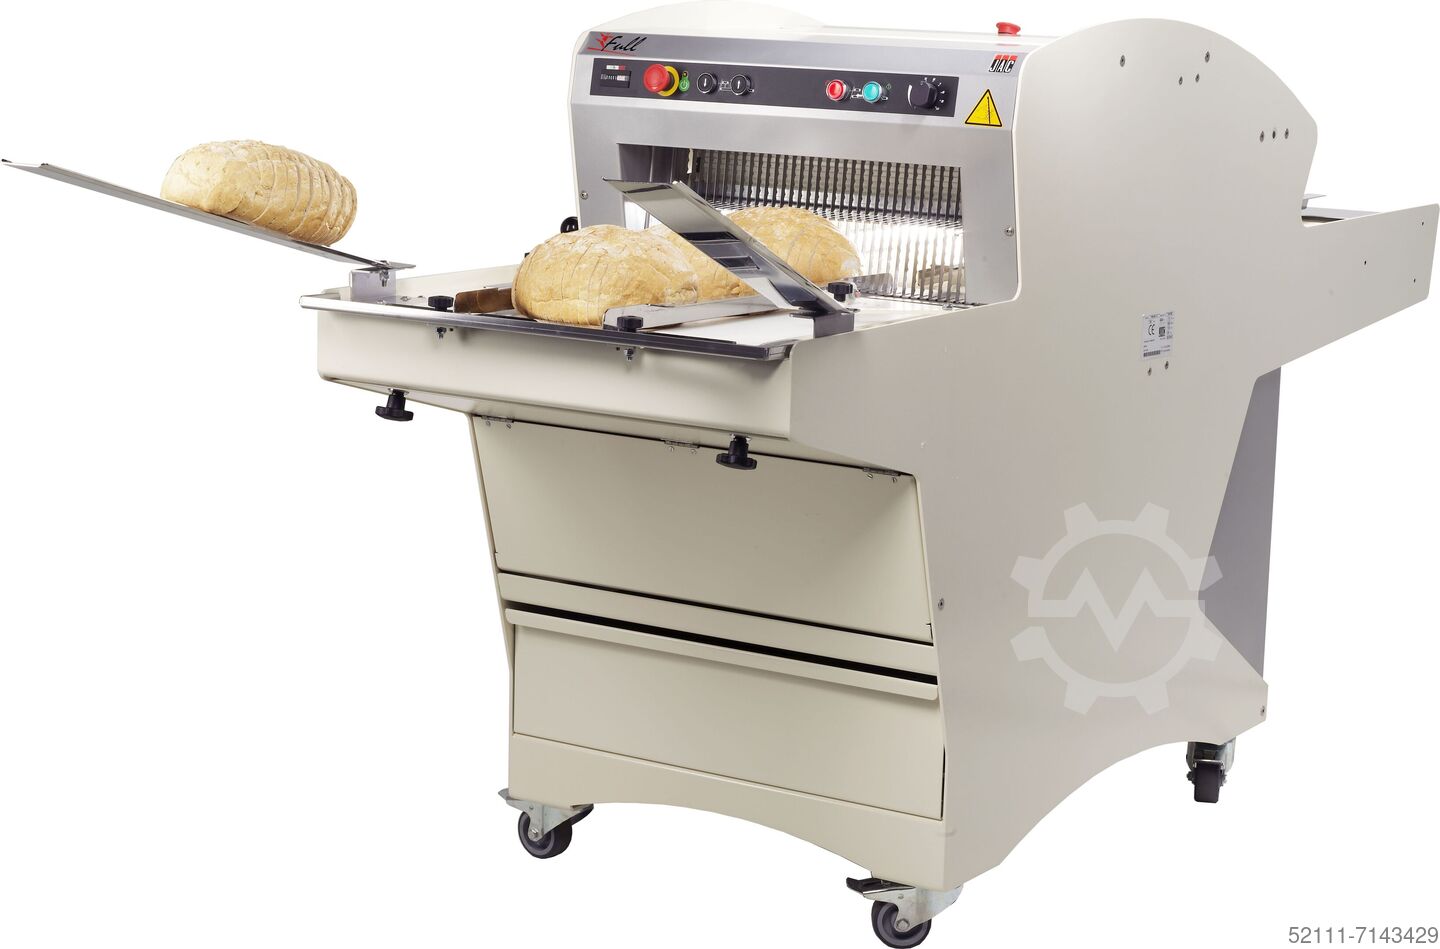 The ZIP slicer by JAC Machines is specifically designed to slice